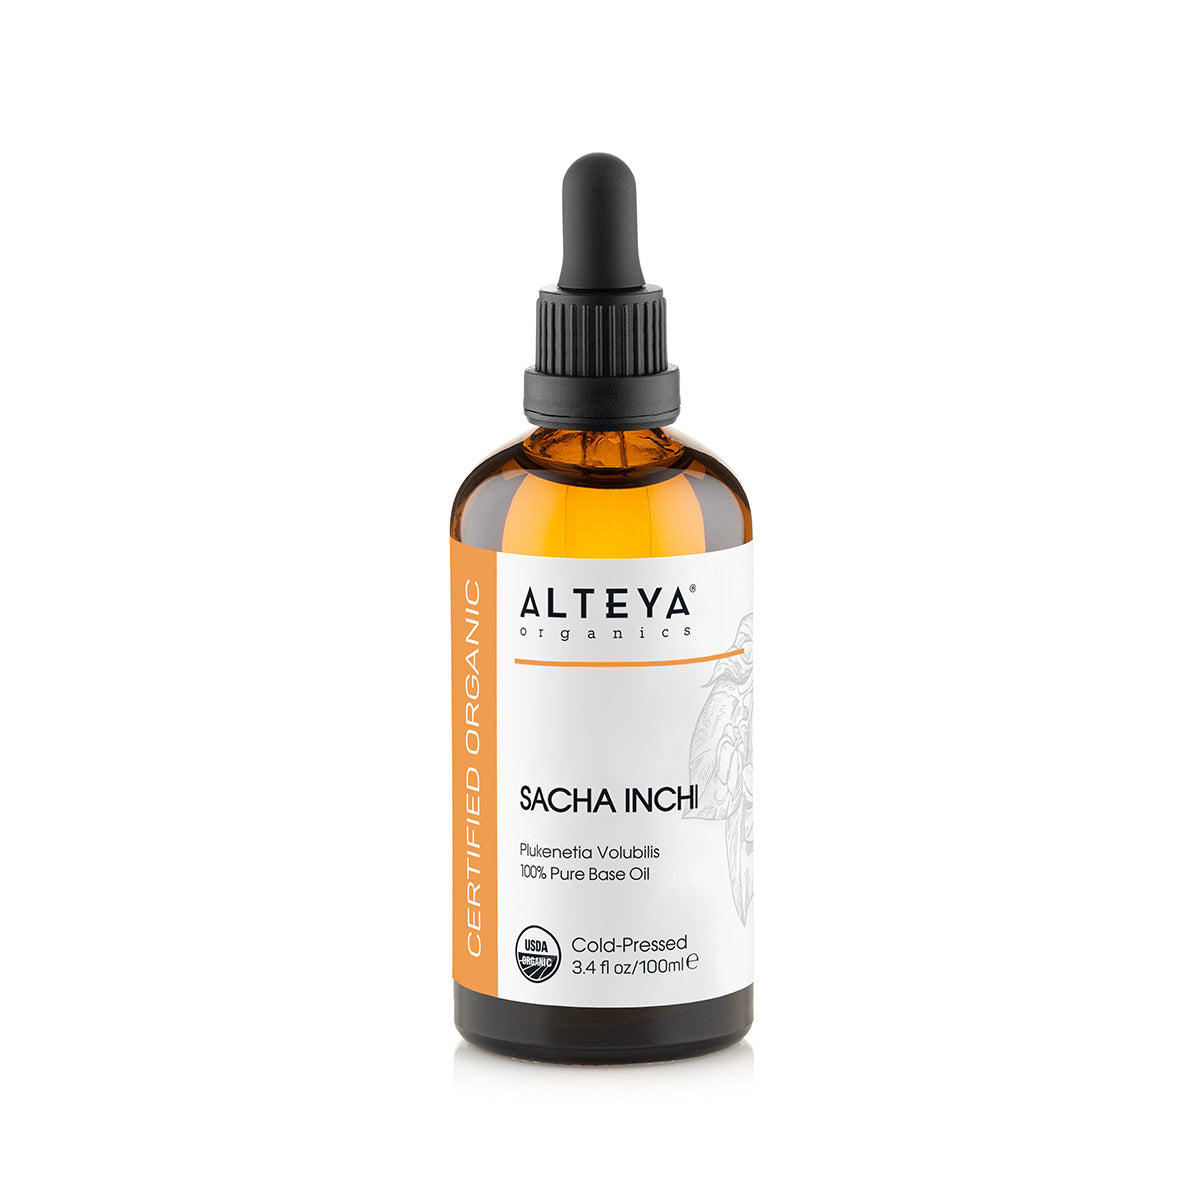 A bottle of Alteya Organics' Organic Sacha Inchi Seed Carrier Oil, enriched with omega-3 fatty acids from Sancha Inchi oil, on a white background.